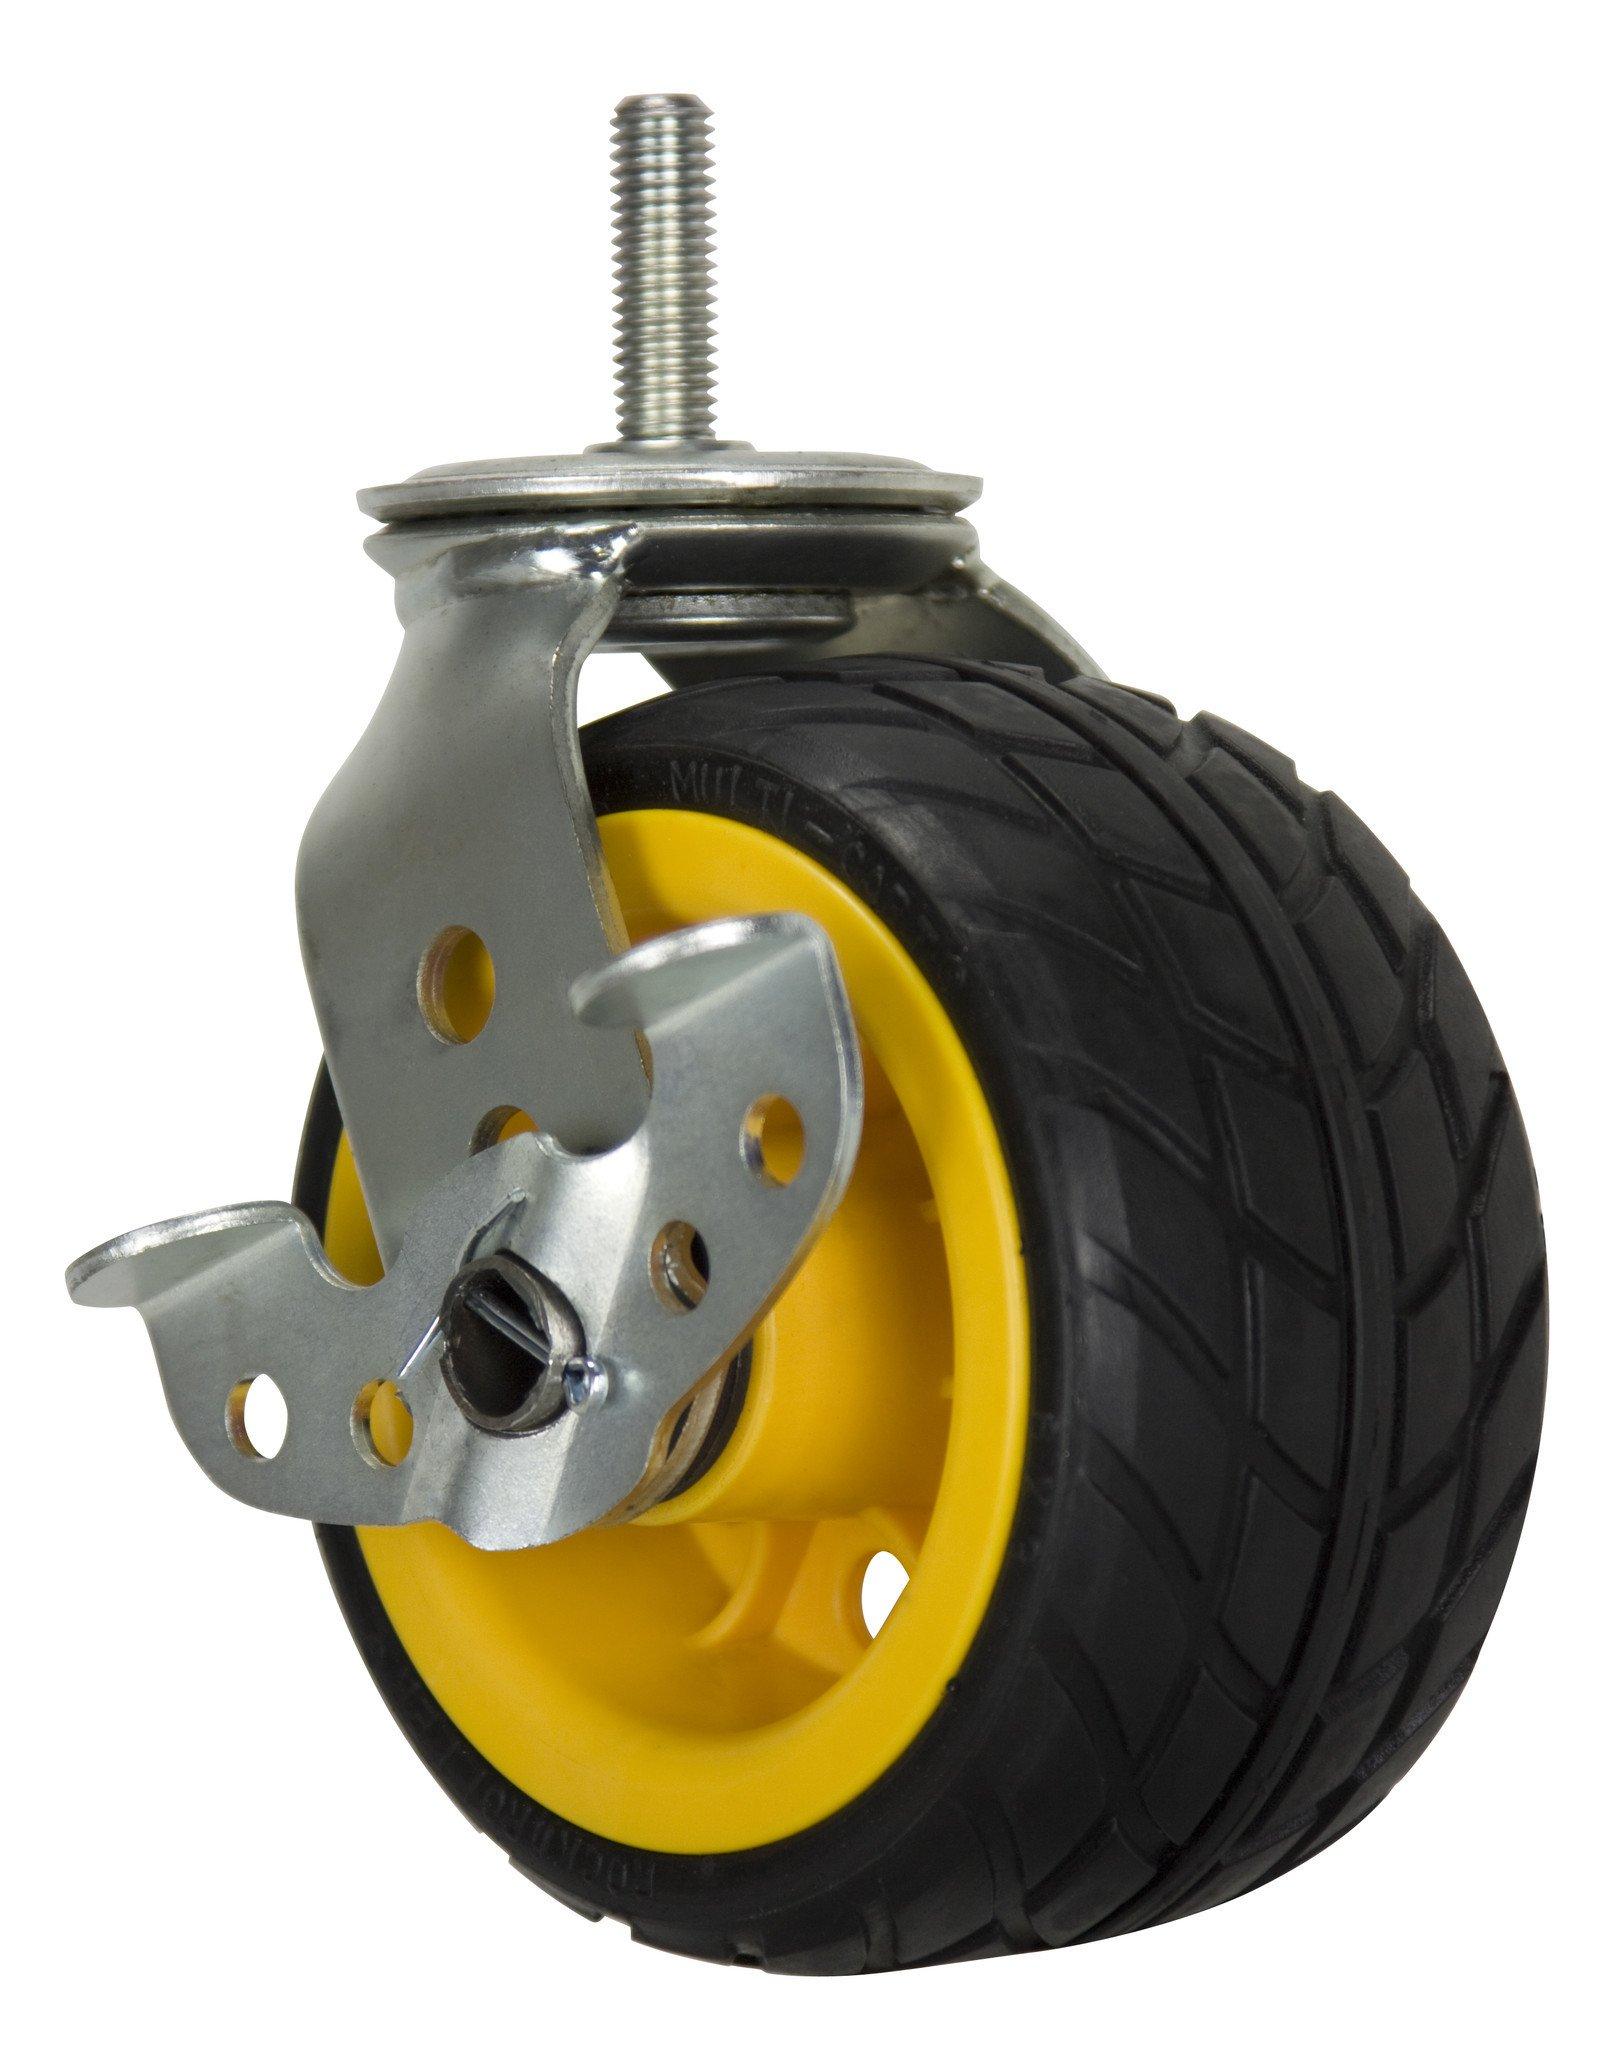 RCSTR6X3 - Ground Glider 6" x 3" Low Profile All Terrain Casters